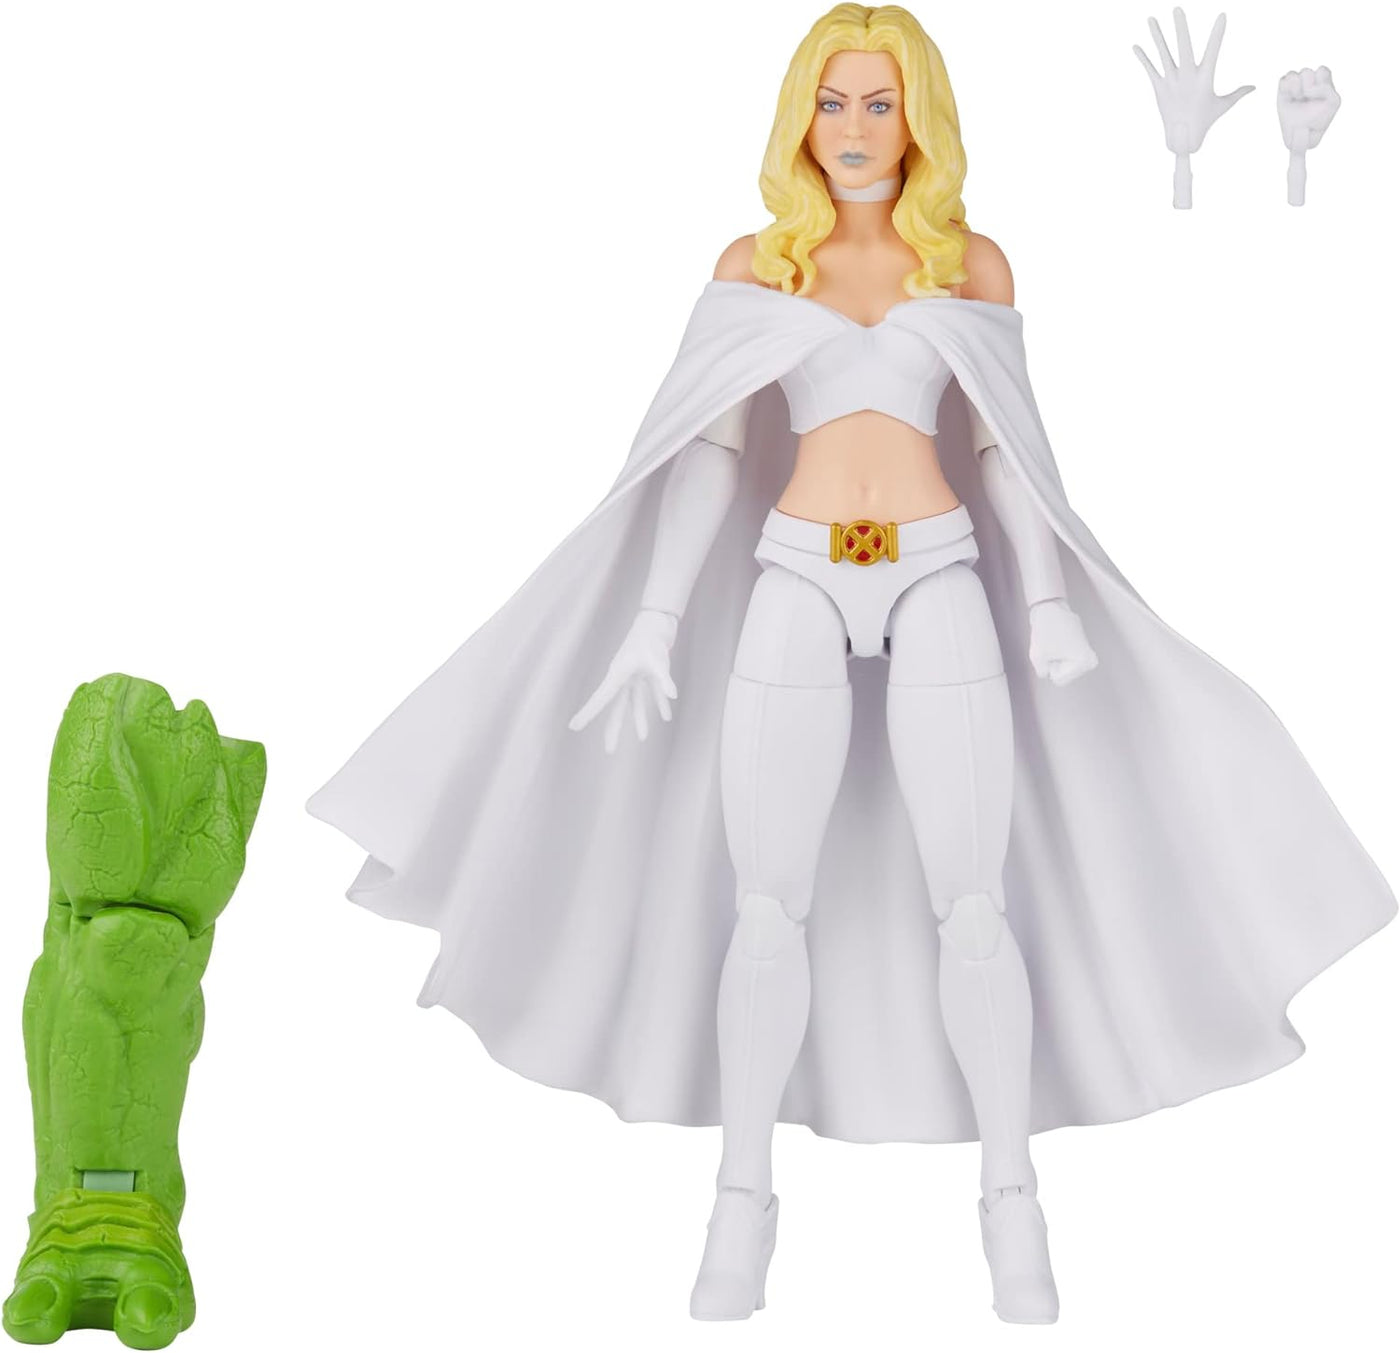 Marvel Legends Series: Emma Frost Astonishing X-Men Collectible 6-Inch Action Figure